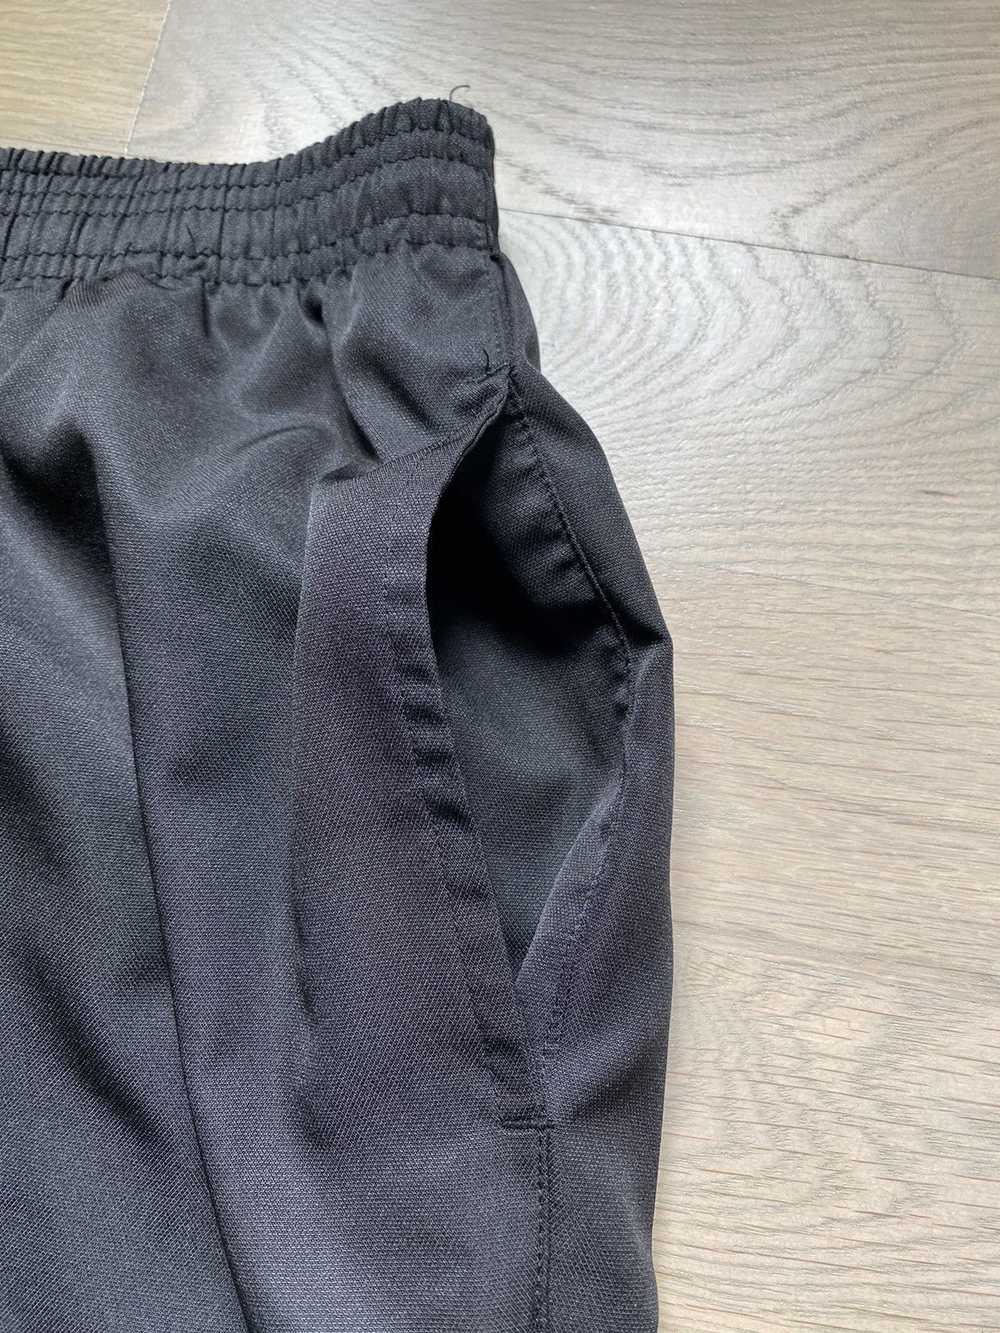 Other × Vintage Tonix Joggers - image 3